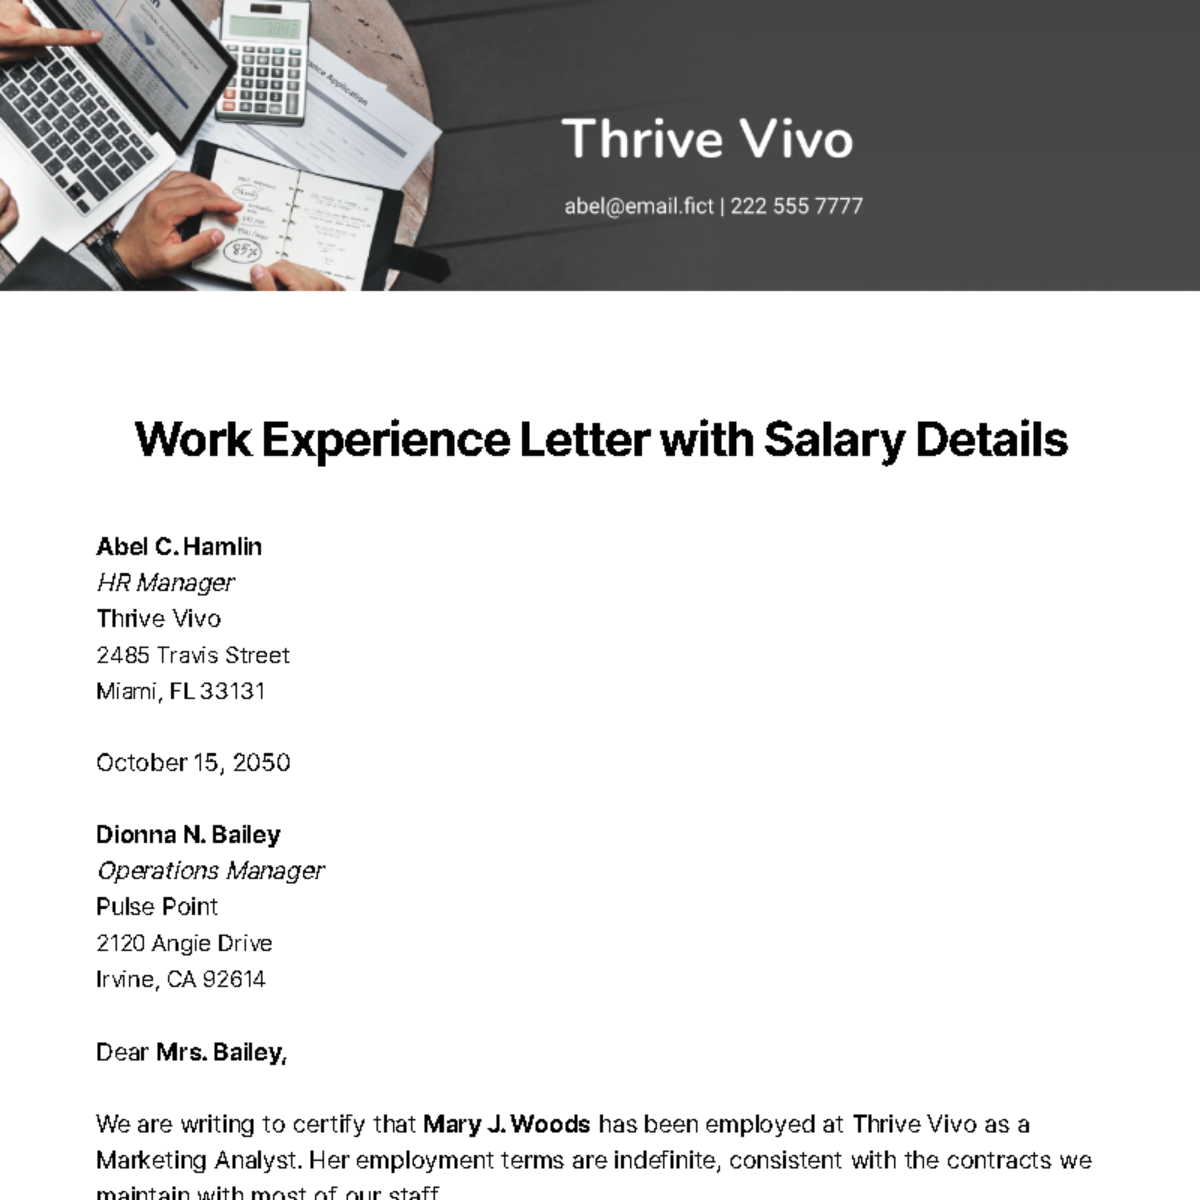 Free Work Experience Letter with Salary Details Template